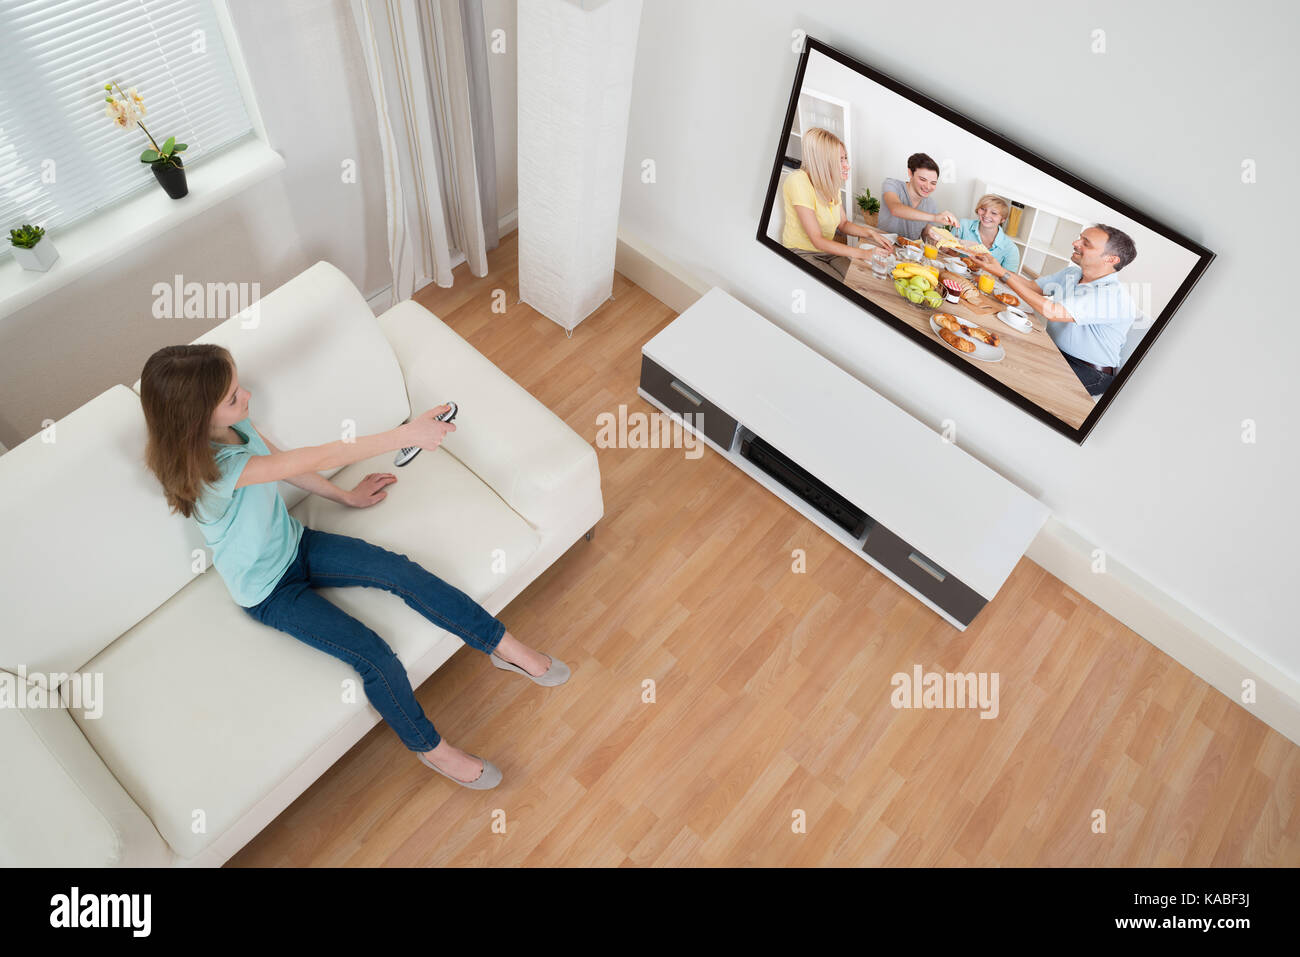 Girl Holding Remote Control In Front Of Television In Living Room Stock Photo